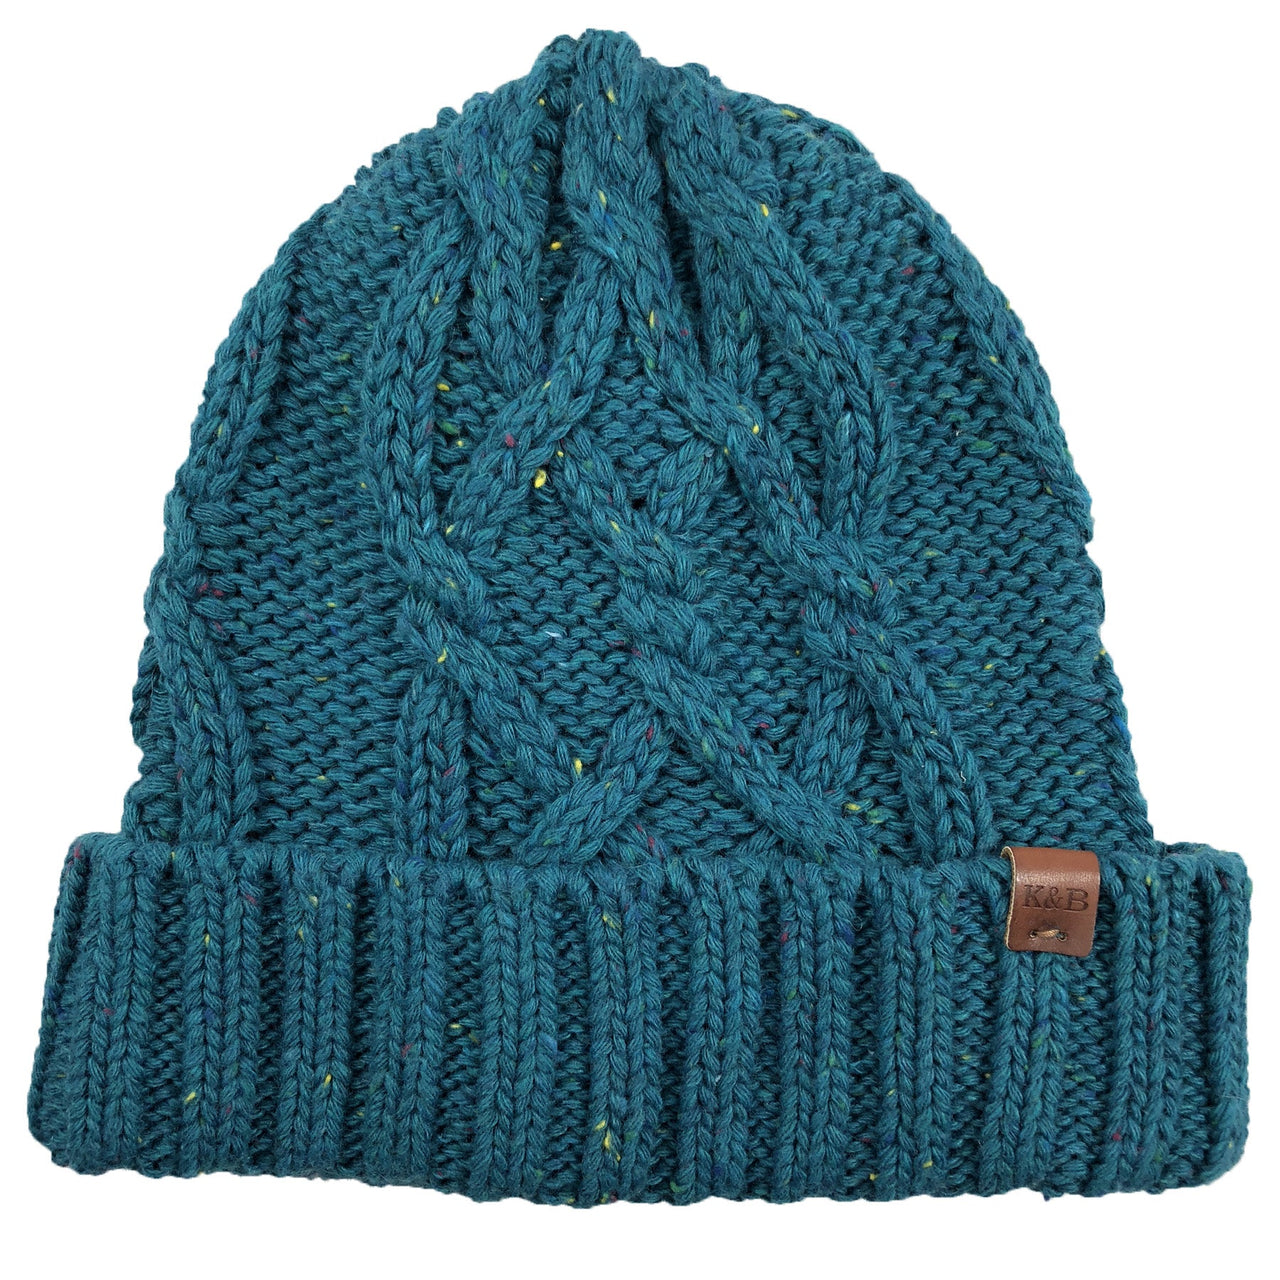 the teal women's cable knit winter beanie is teal with cable knit